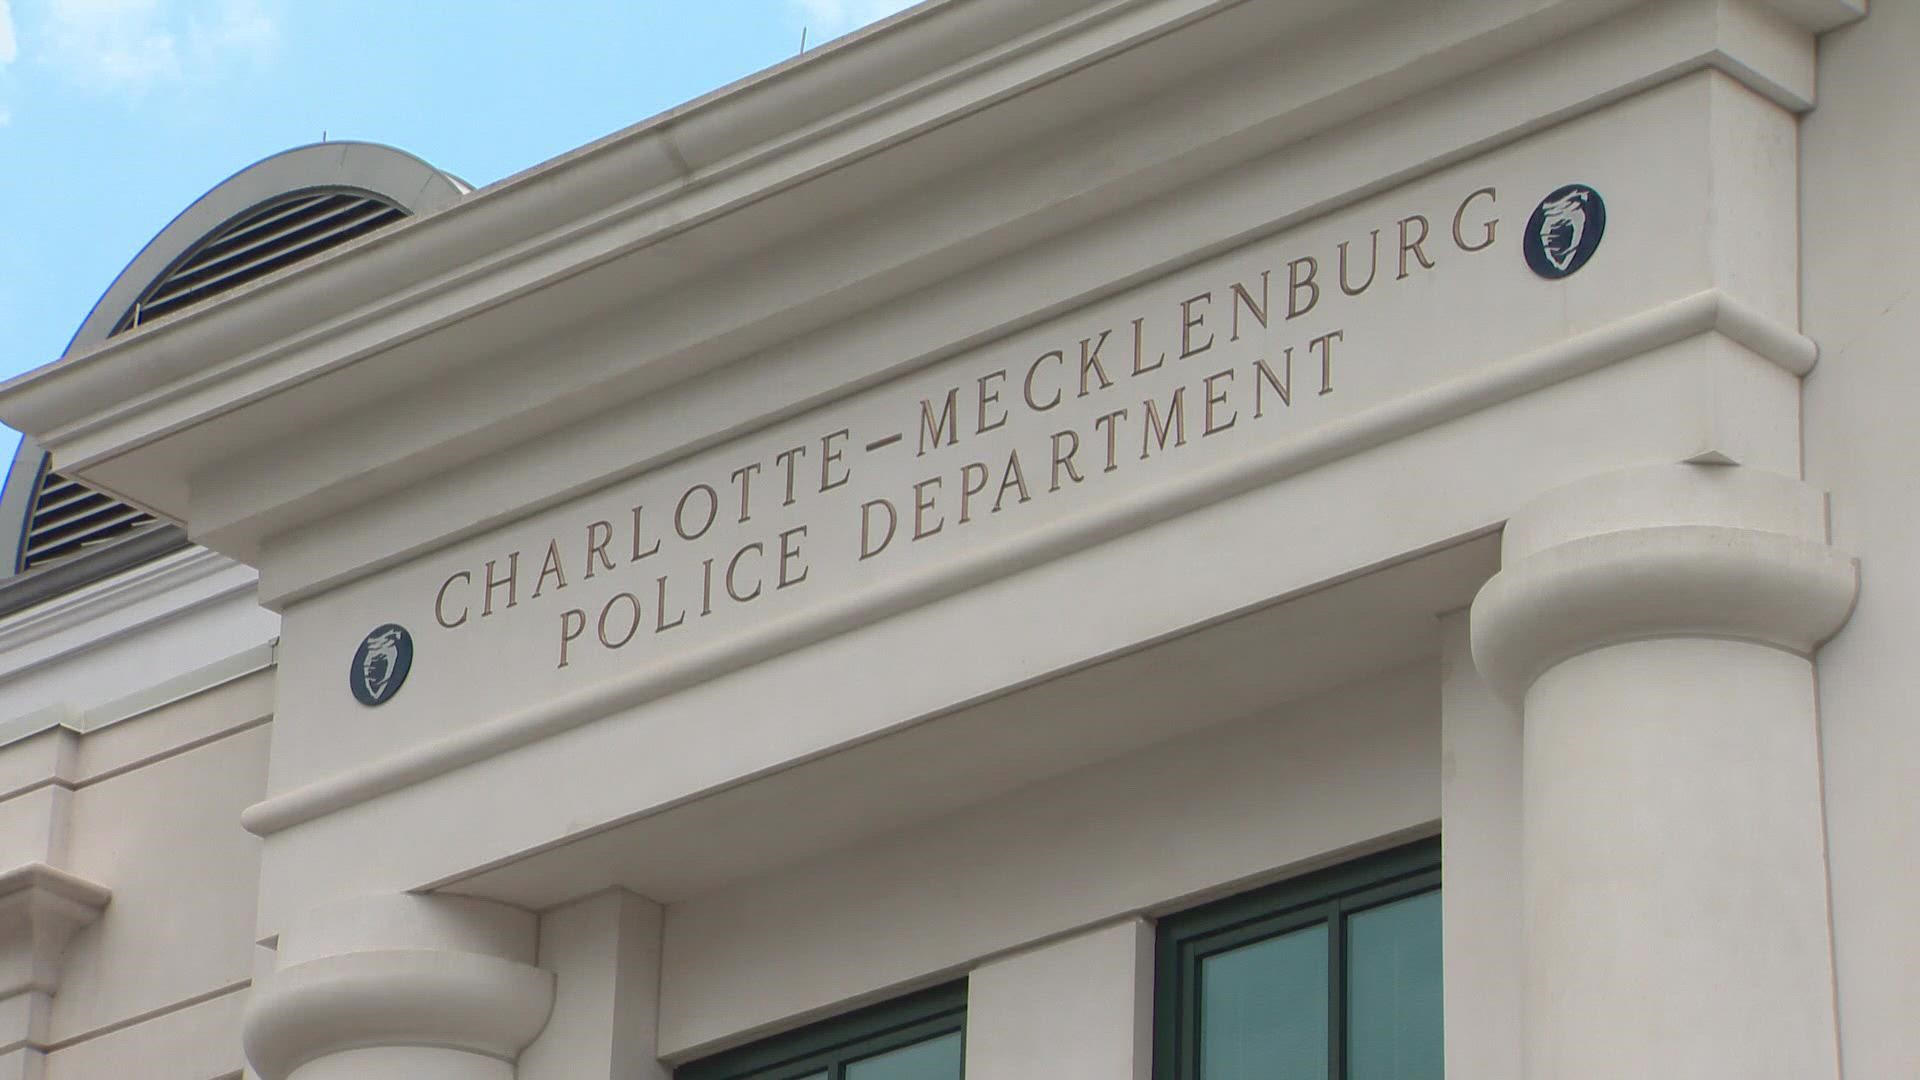 CMPD said violent crime is down, and they are proud of that, but there were 110 homicides last year.